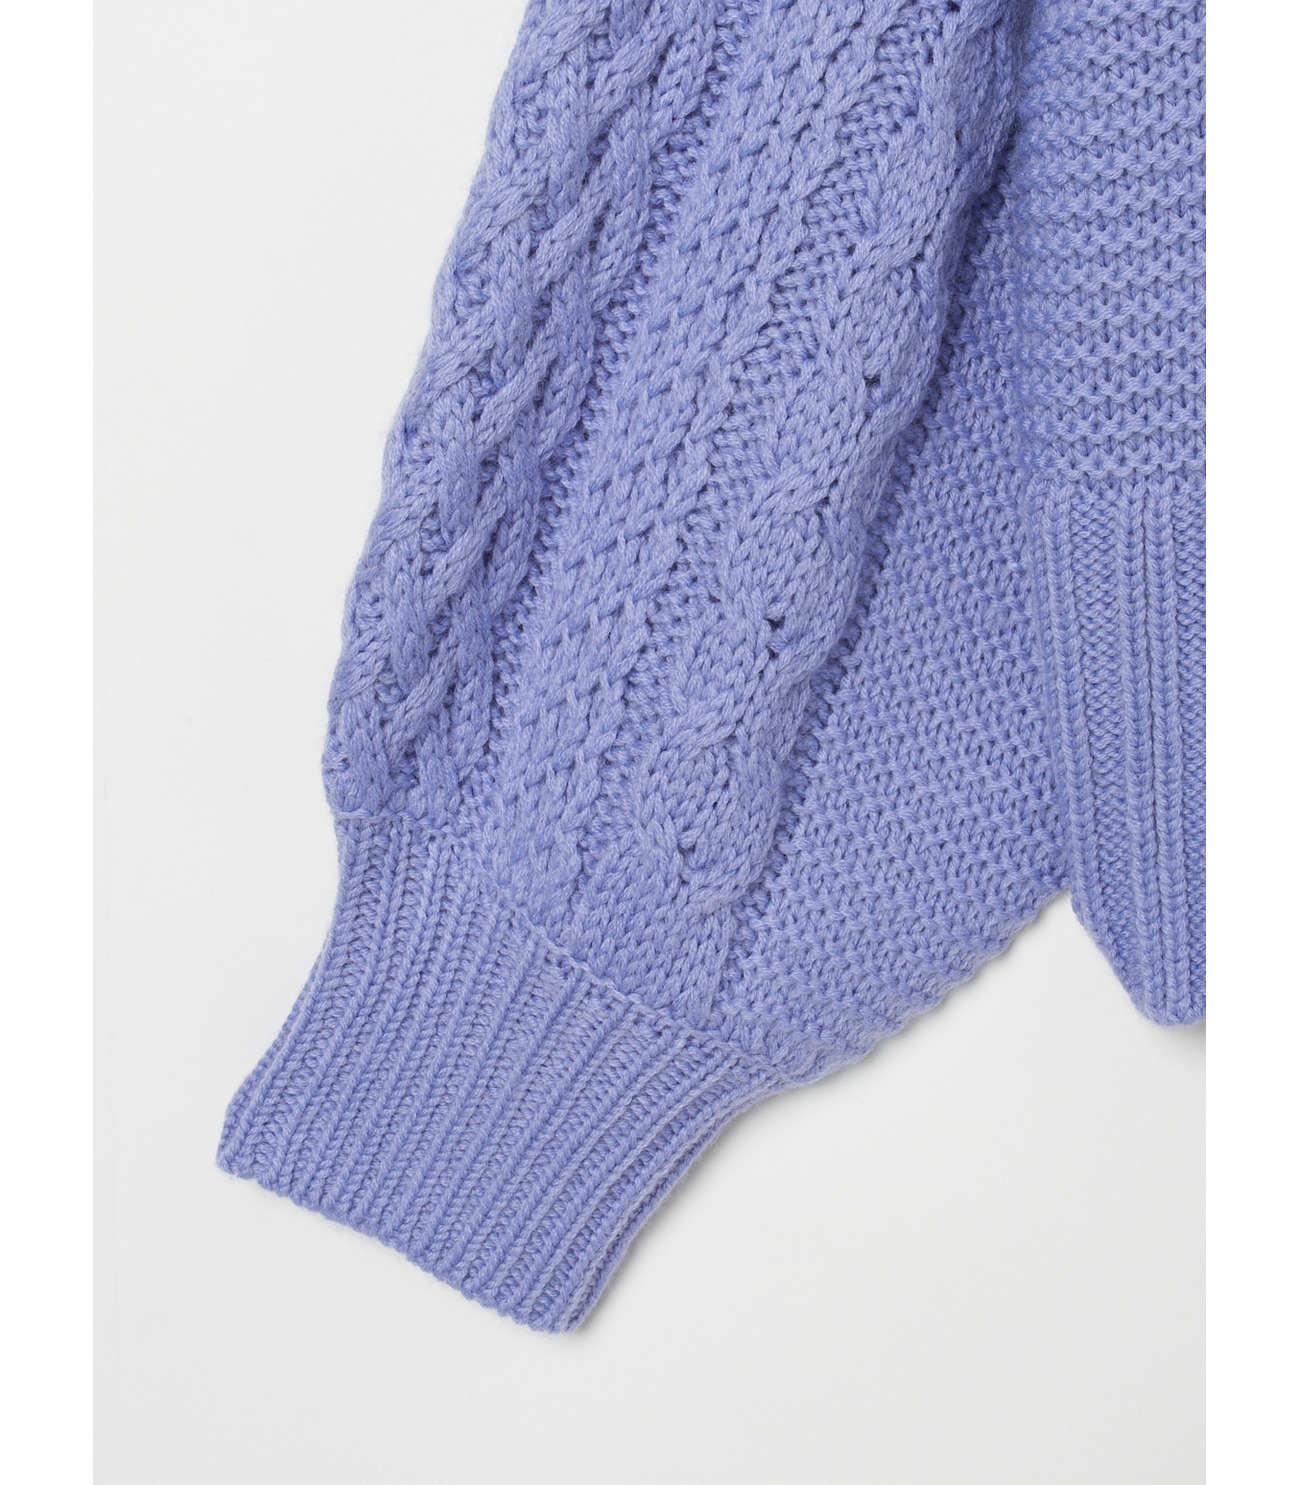 Bulky sweater l/s cable cardy 詳細画像 purple 4